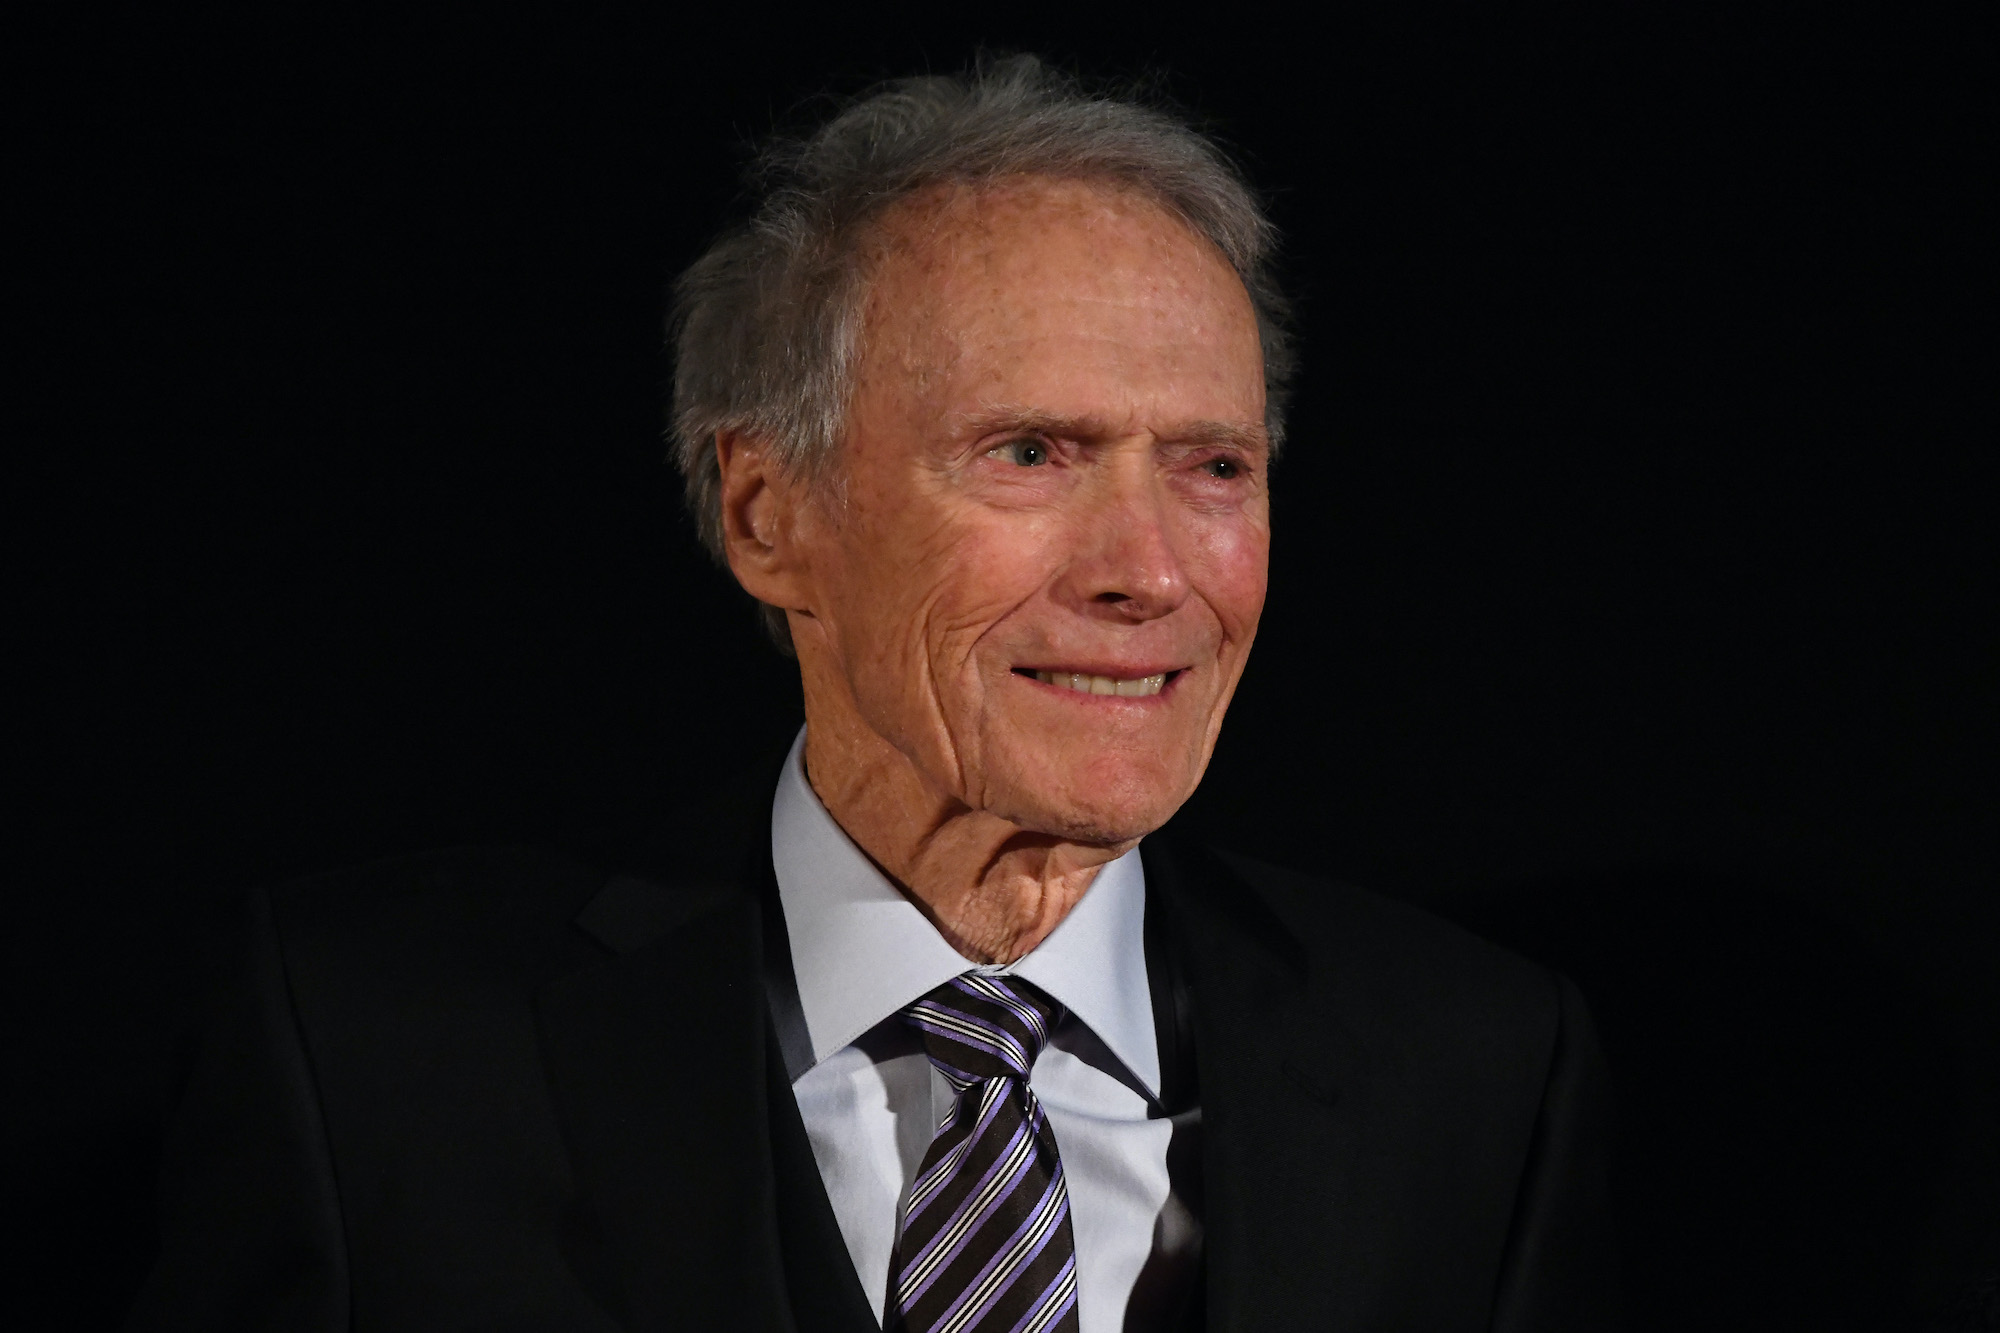 Clint Eastwood smiling in front of a black background